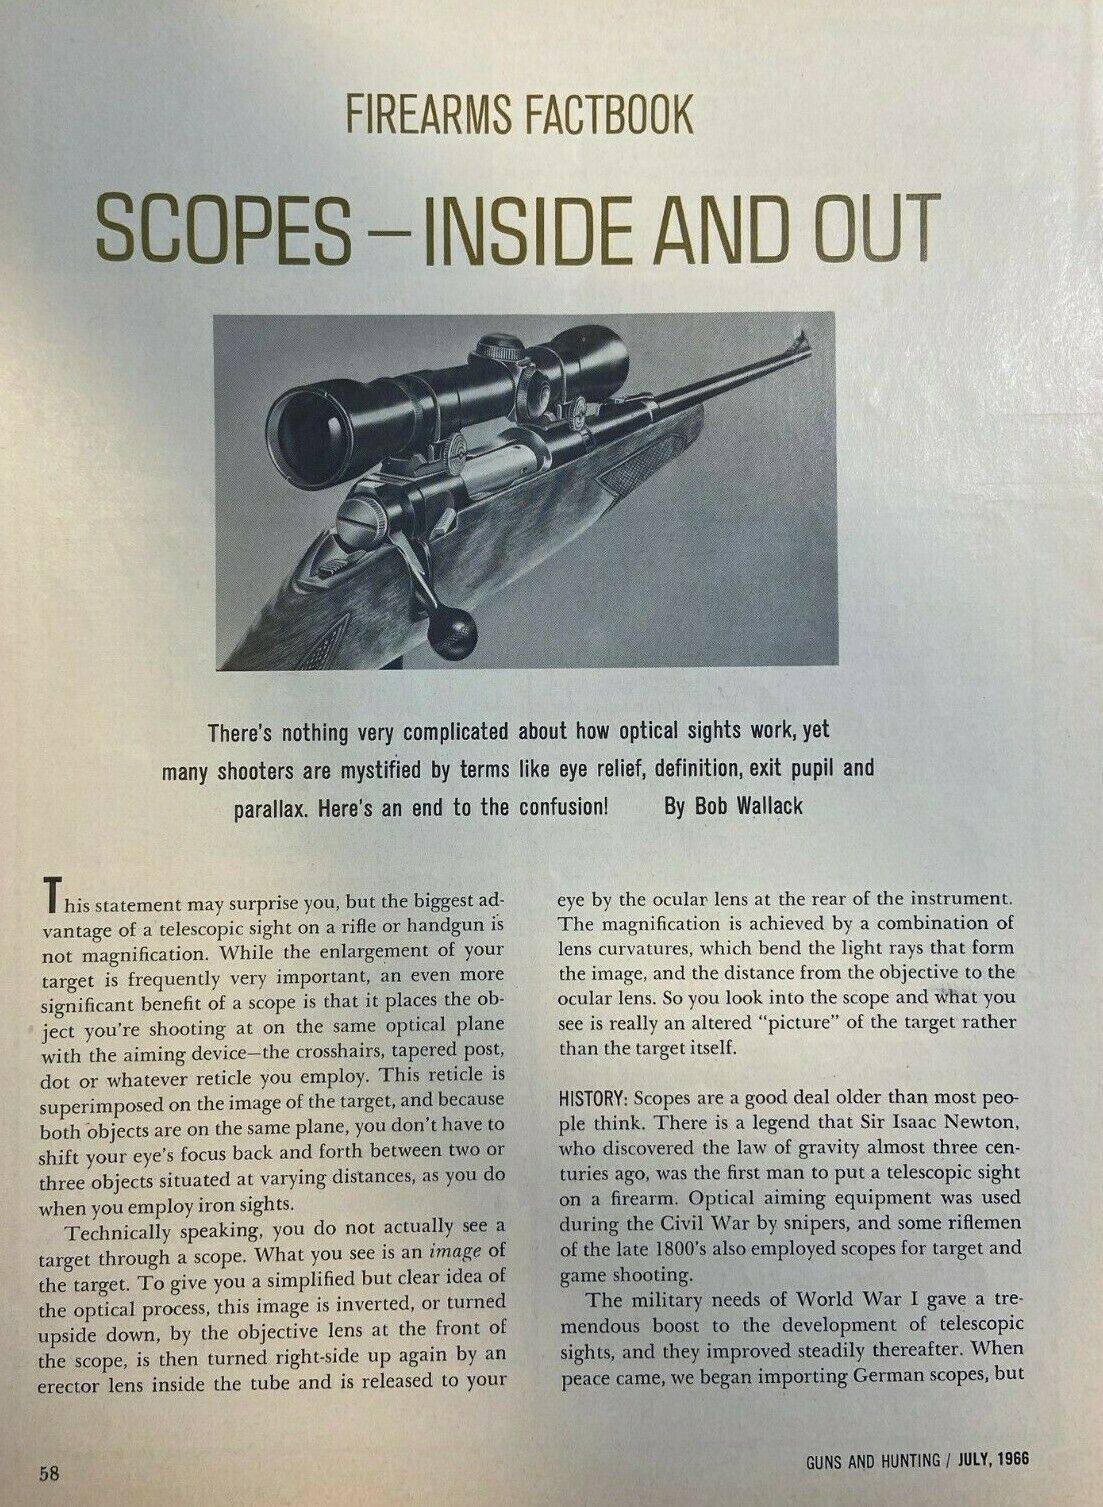 1966 How Scopes Work For Rifles and Pistols illustrated